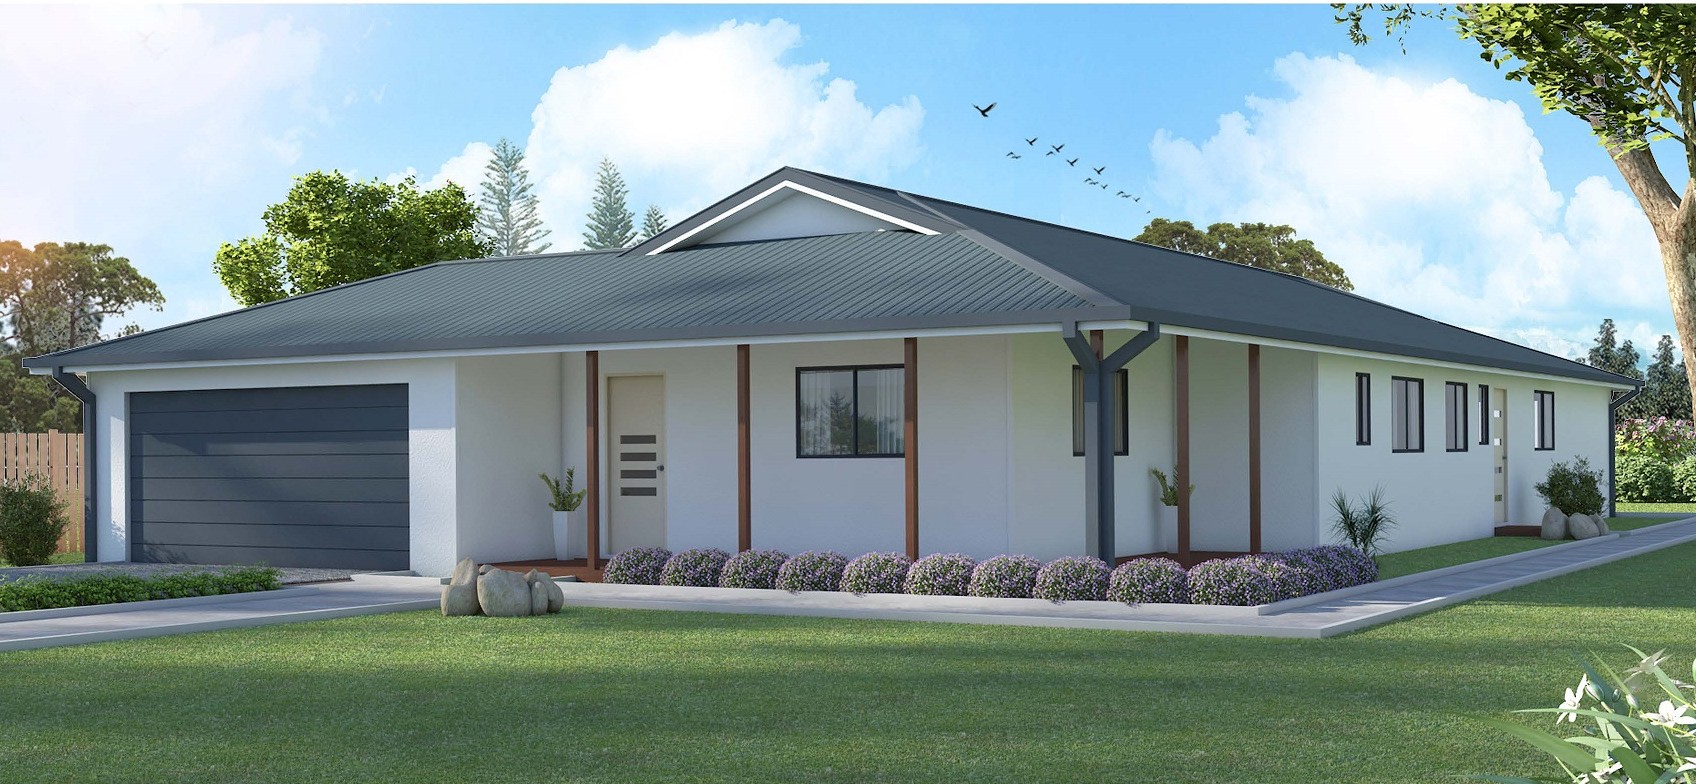 Kit Homes Queensland | Wholesale Homes and Sheds